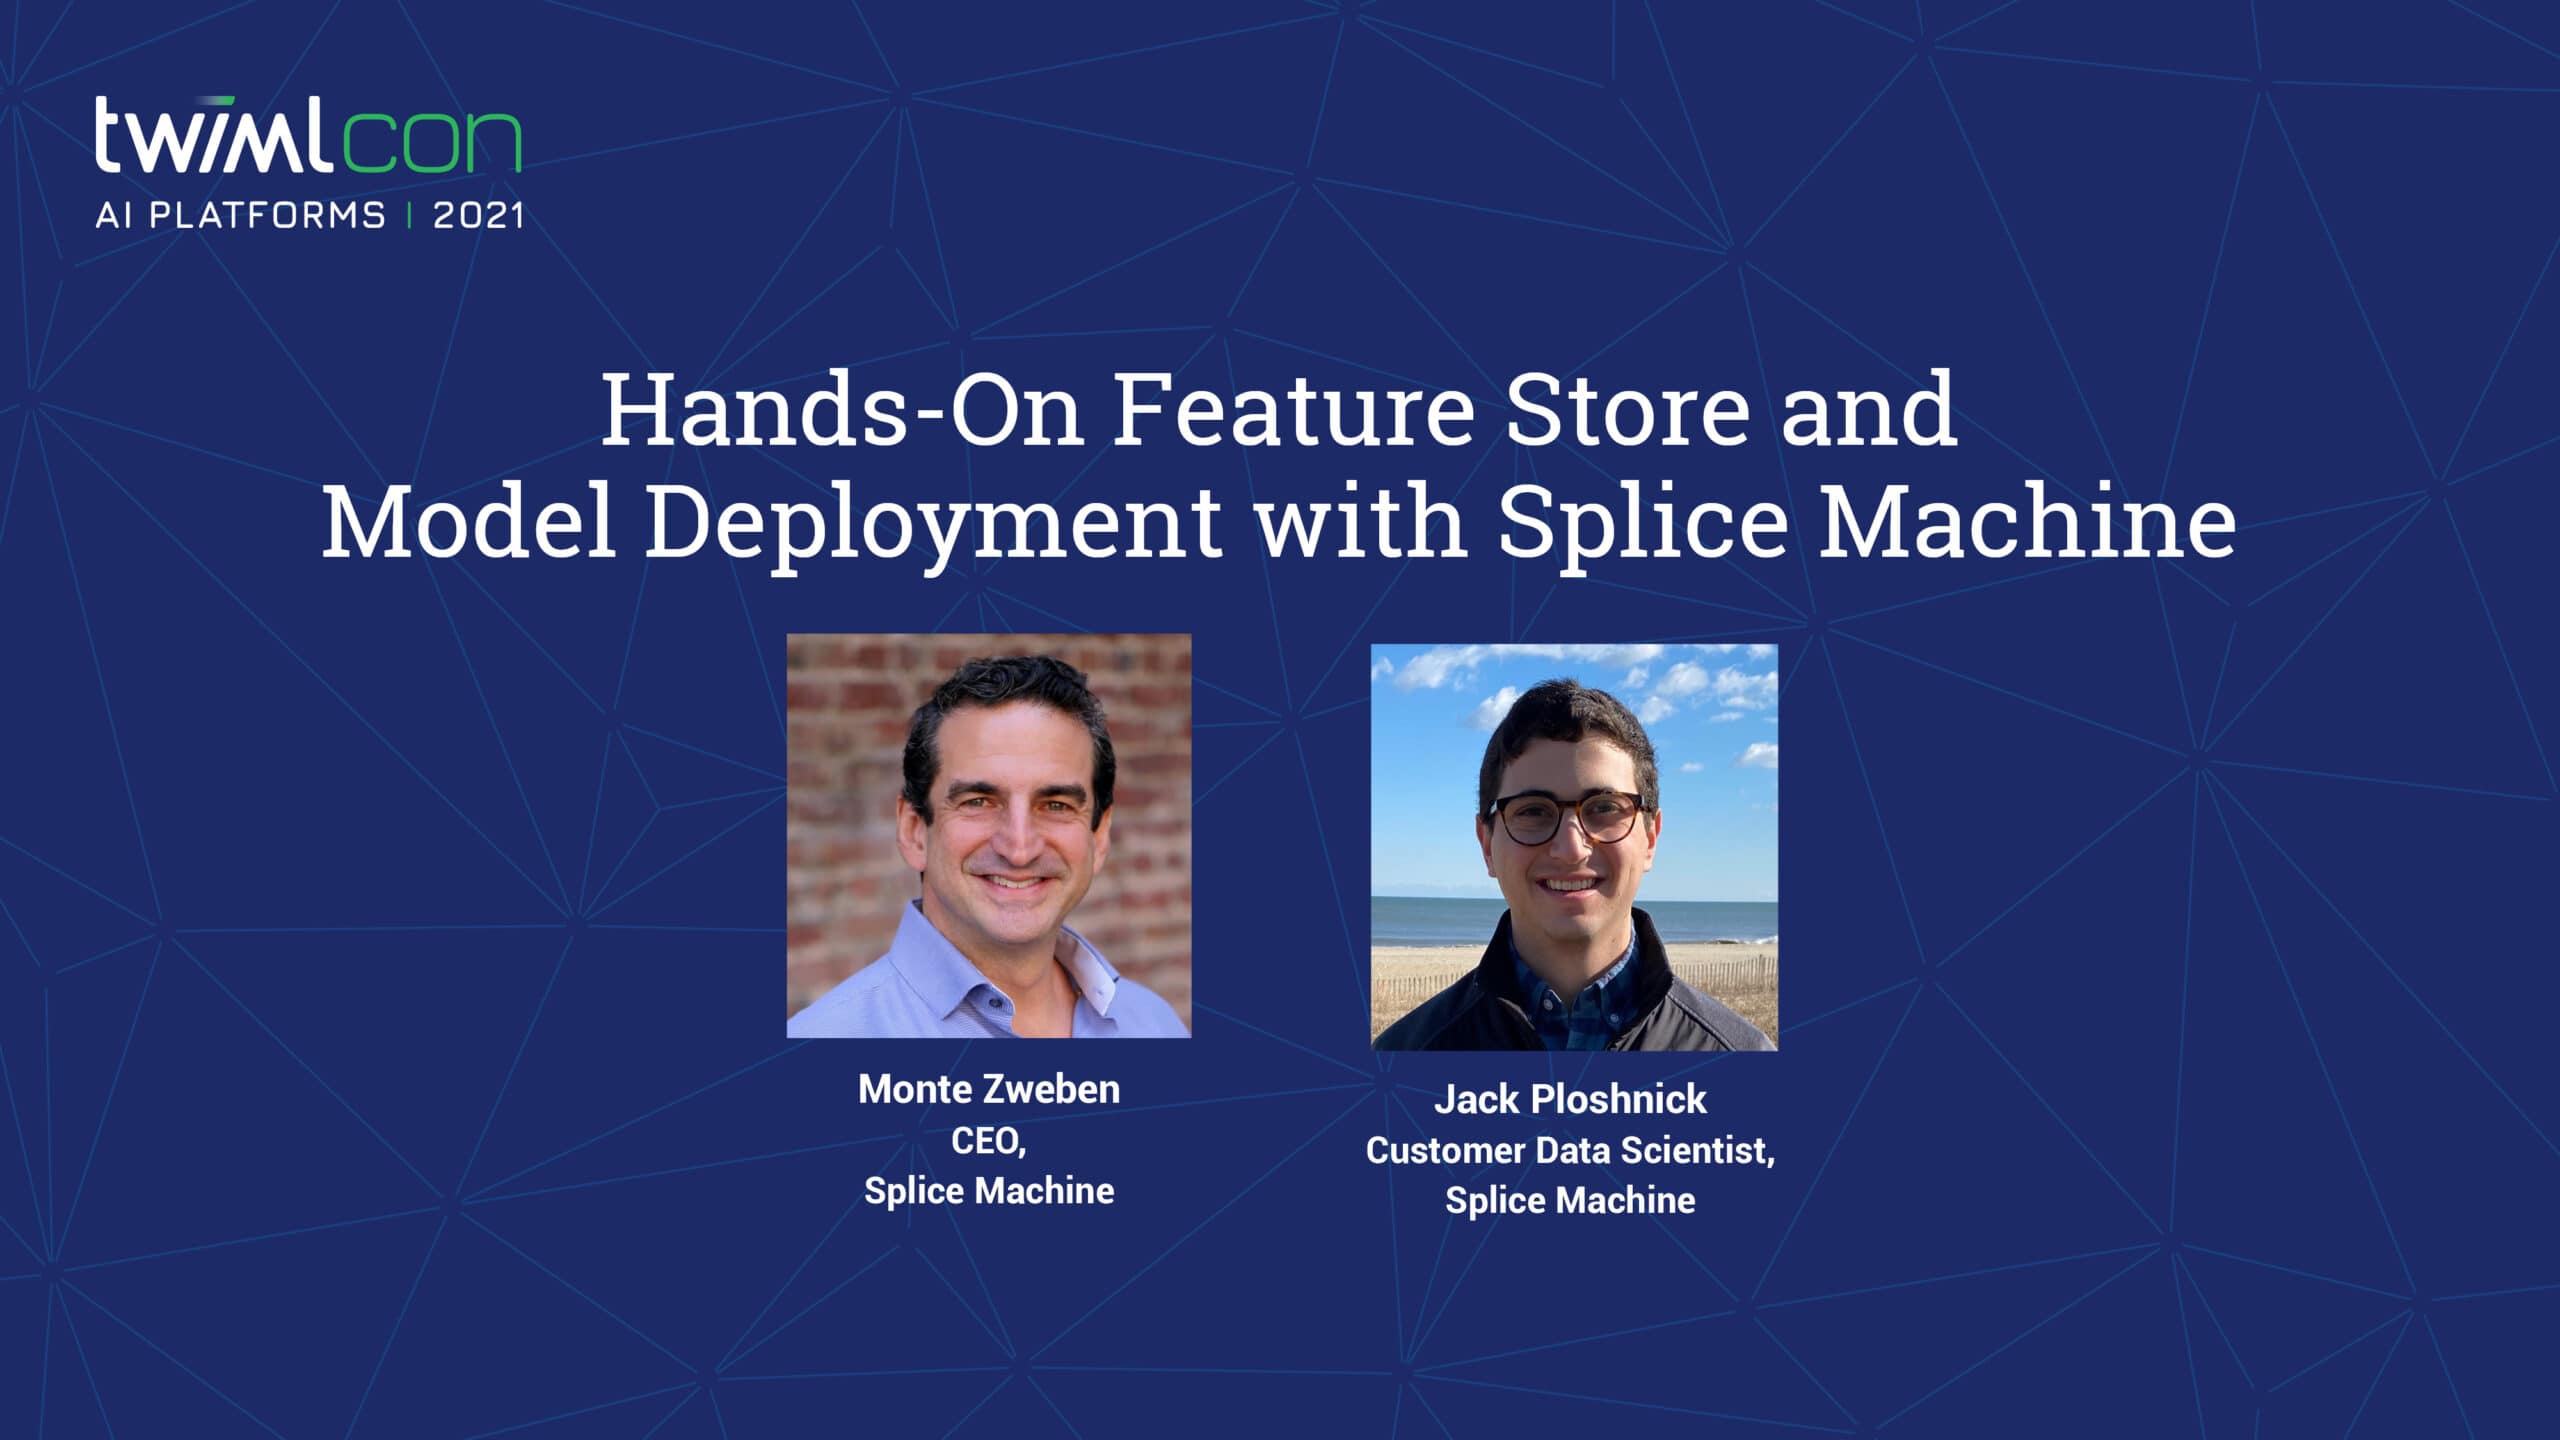 Cover Image: Hands-On Feature Store and Model Deployment with Splice Machine